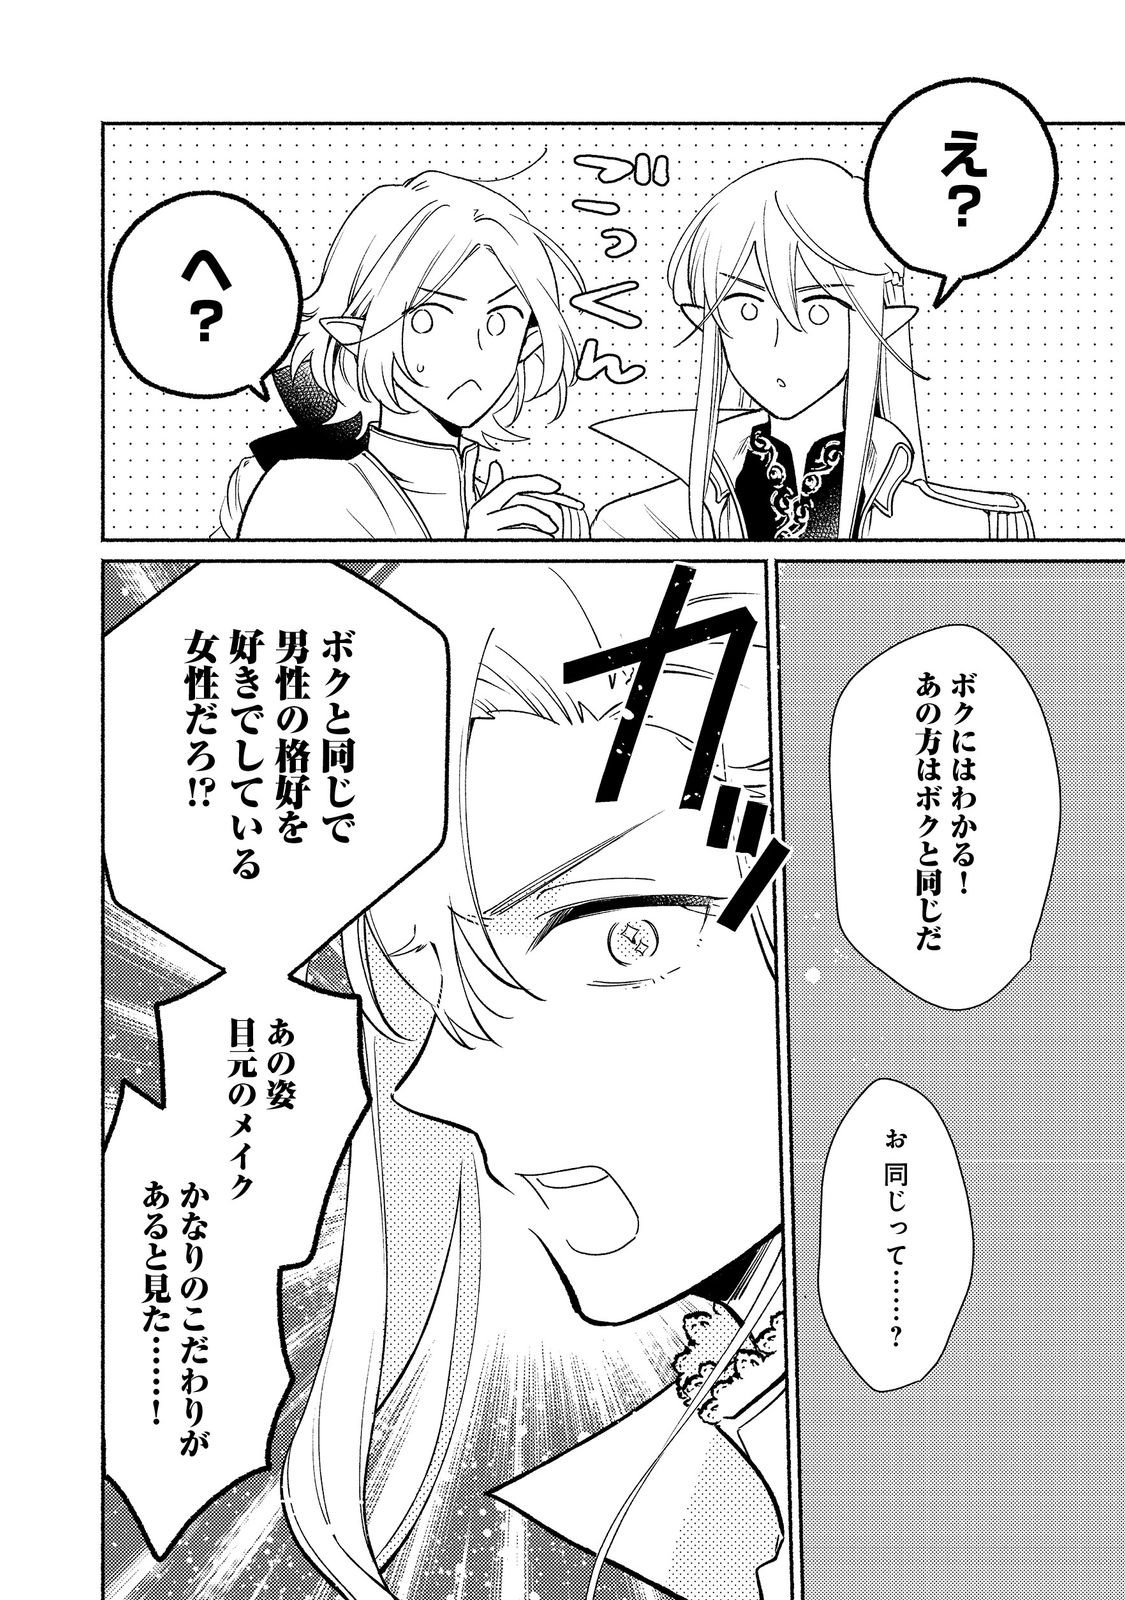 I’m the White Pig Nobleman 第26.2話 - Page 11